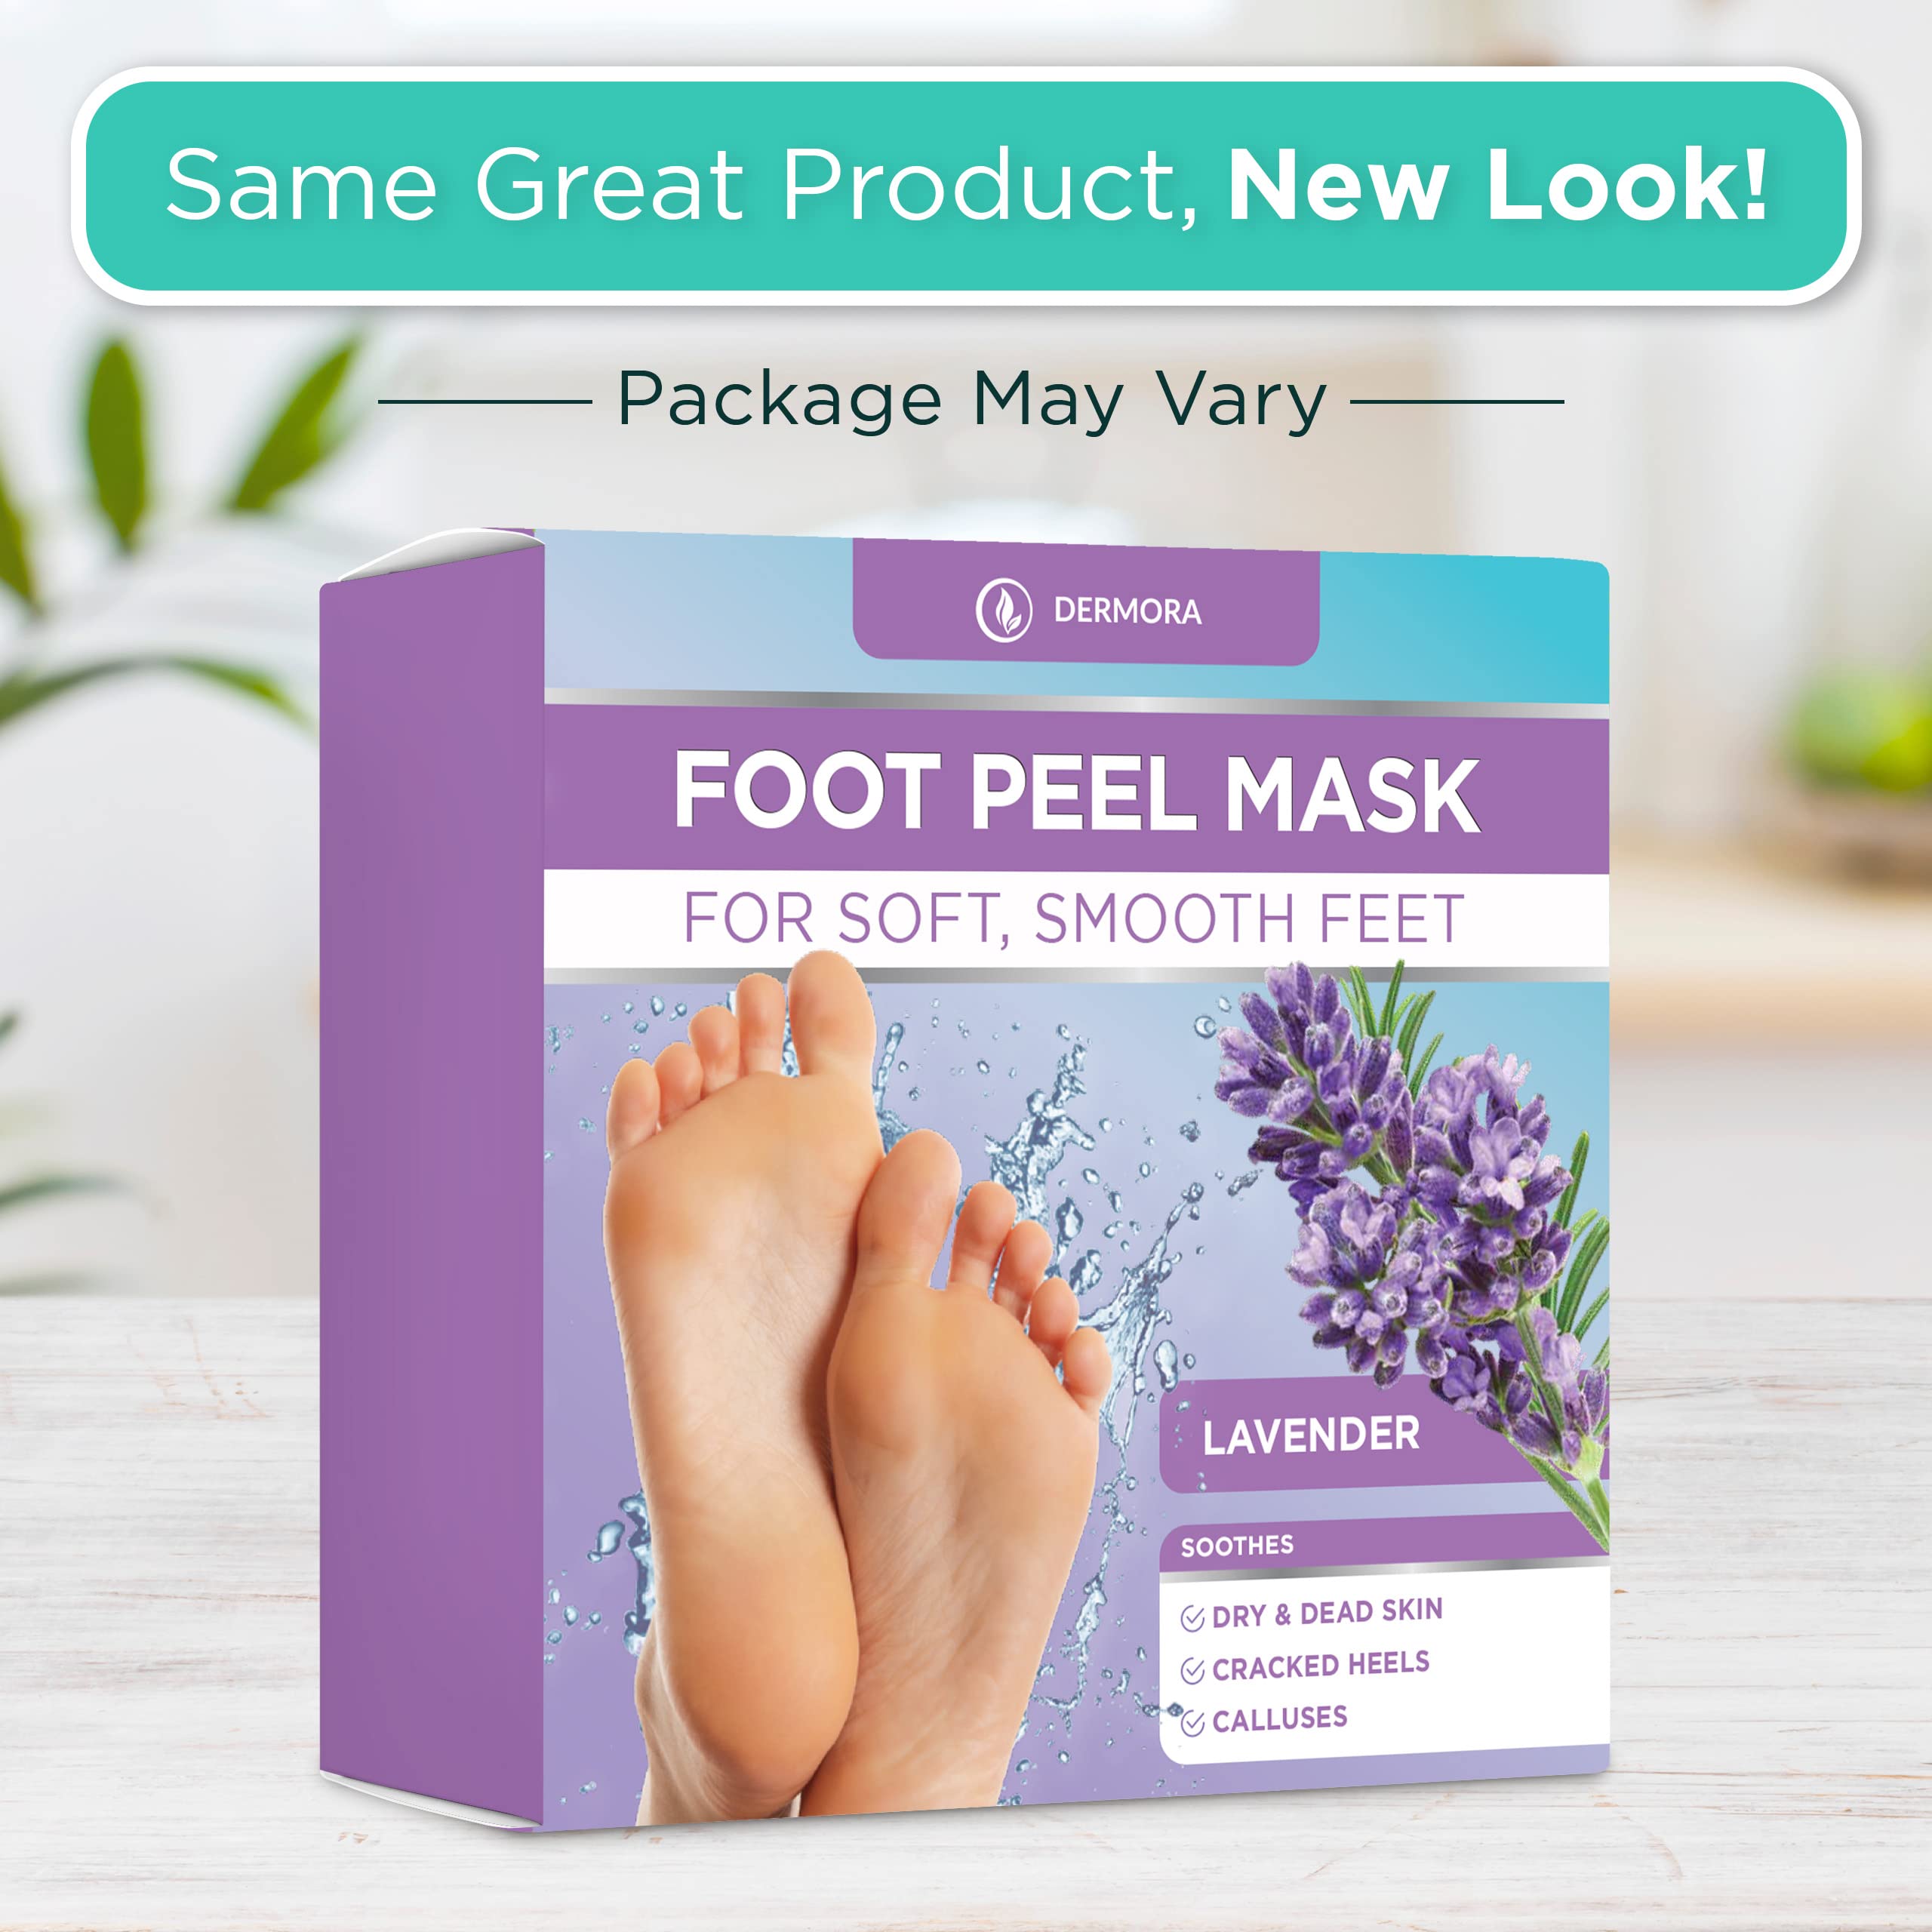 DERMORA Foot Peel Mask - 2 Pack of Regular Size Exfoliating Foot Masks for Dry, Cracked Feet, Callus, Dead Skin Remover - Feet Peeling Mask for baby soft feet, French Lavender Scent